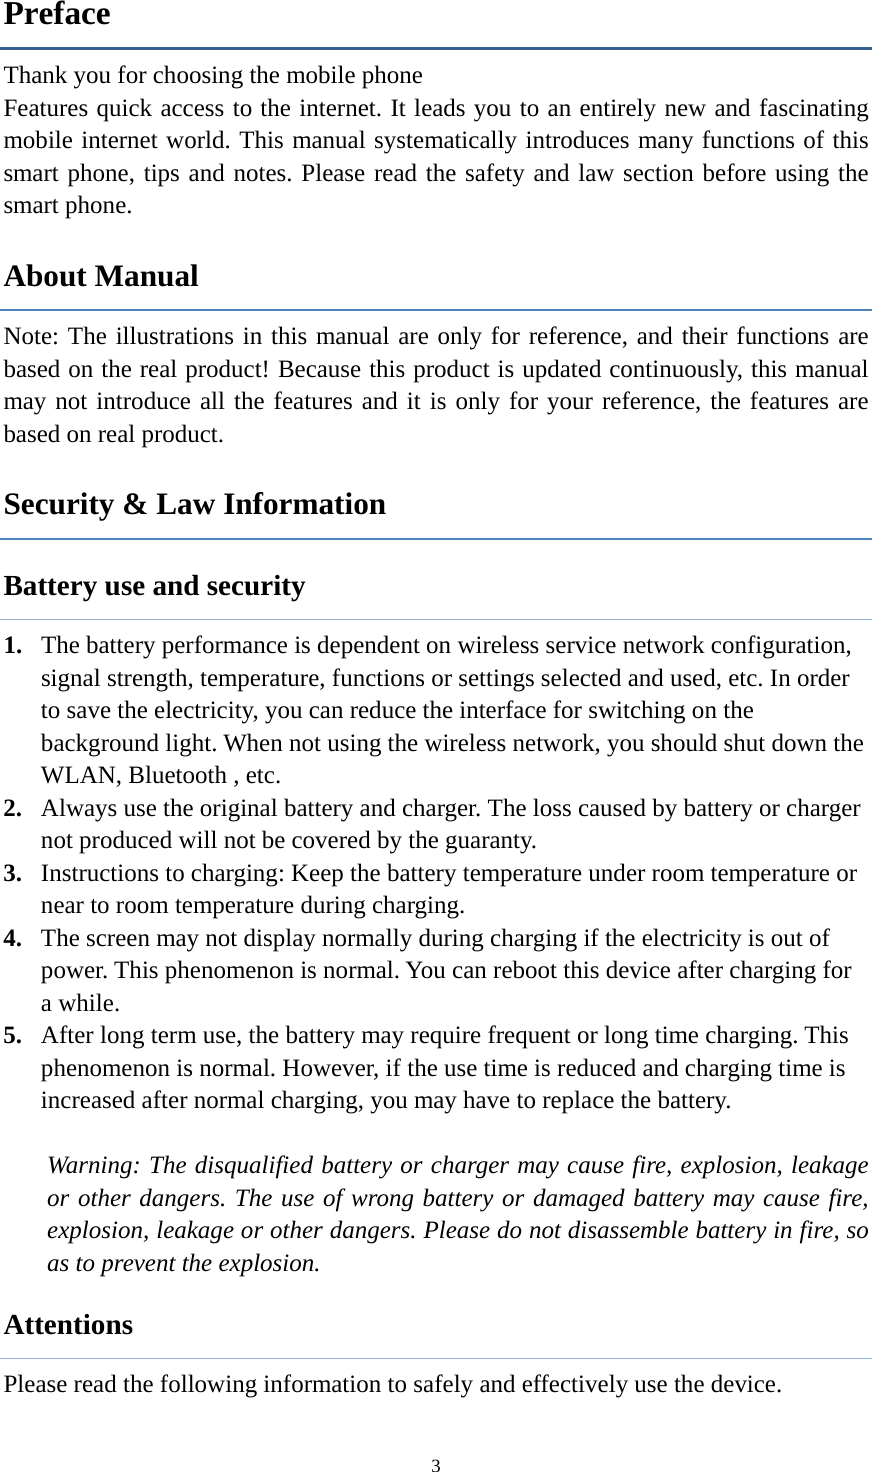  3Preface Thank you for choosing the mobile phone Features quick access to the internet. It leads you to an entirely new and fascinating mobile internet world. This manual systematically introduces many functions of this smart phone, tips and notes. Please read the safety and law section before using the smart phone.   About Manual Note: The illustrations in this manual are only for reference, and their functions are based on the real product! Because this product is updated continuously, this manual may not introduce all the features and it is only for your reference, the features are based on real product. Security &amp; Law Information   Battery use and security 1. The battery performance is dependent on wireless service network configuration, signal strength, temperature, functions or settings selected and used, etc. In order to save the electricity, you can reduce the interface for switching on the background light. When not using the wireless network, you should shut down the WLAN, Bluetooth , etc.   2. Always use the original battery and charger. The loss caused by battery or charger not produced will not be covered by the guaranty. 3. Instructions to charging: Keep the battery temperature under room temperature or near to room temperature during charging.   4. The screen may not display normally during charging if the electricity is out of power. This phenomenon is normal. You can reboot this device after charging for a while. 5. After long term use, the battery may require frequent or long time charging. This phenomenon is normal. However, if the use time is reduced and charging time is increased after normal charging, you may have to replace the battery.  Warning: The disqualified battery or charger may cause fire, explosion, leakage or other dangers. The use of wrong battery or damaged battery may cause fire, explosion, leakage or other dangers. Please do not disassemble battery in fire, so as to prevent the explosion. Attentions Please read the following information to safely and effectively use the device.   